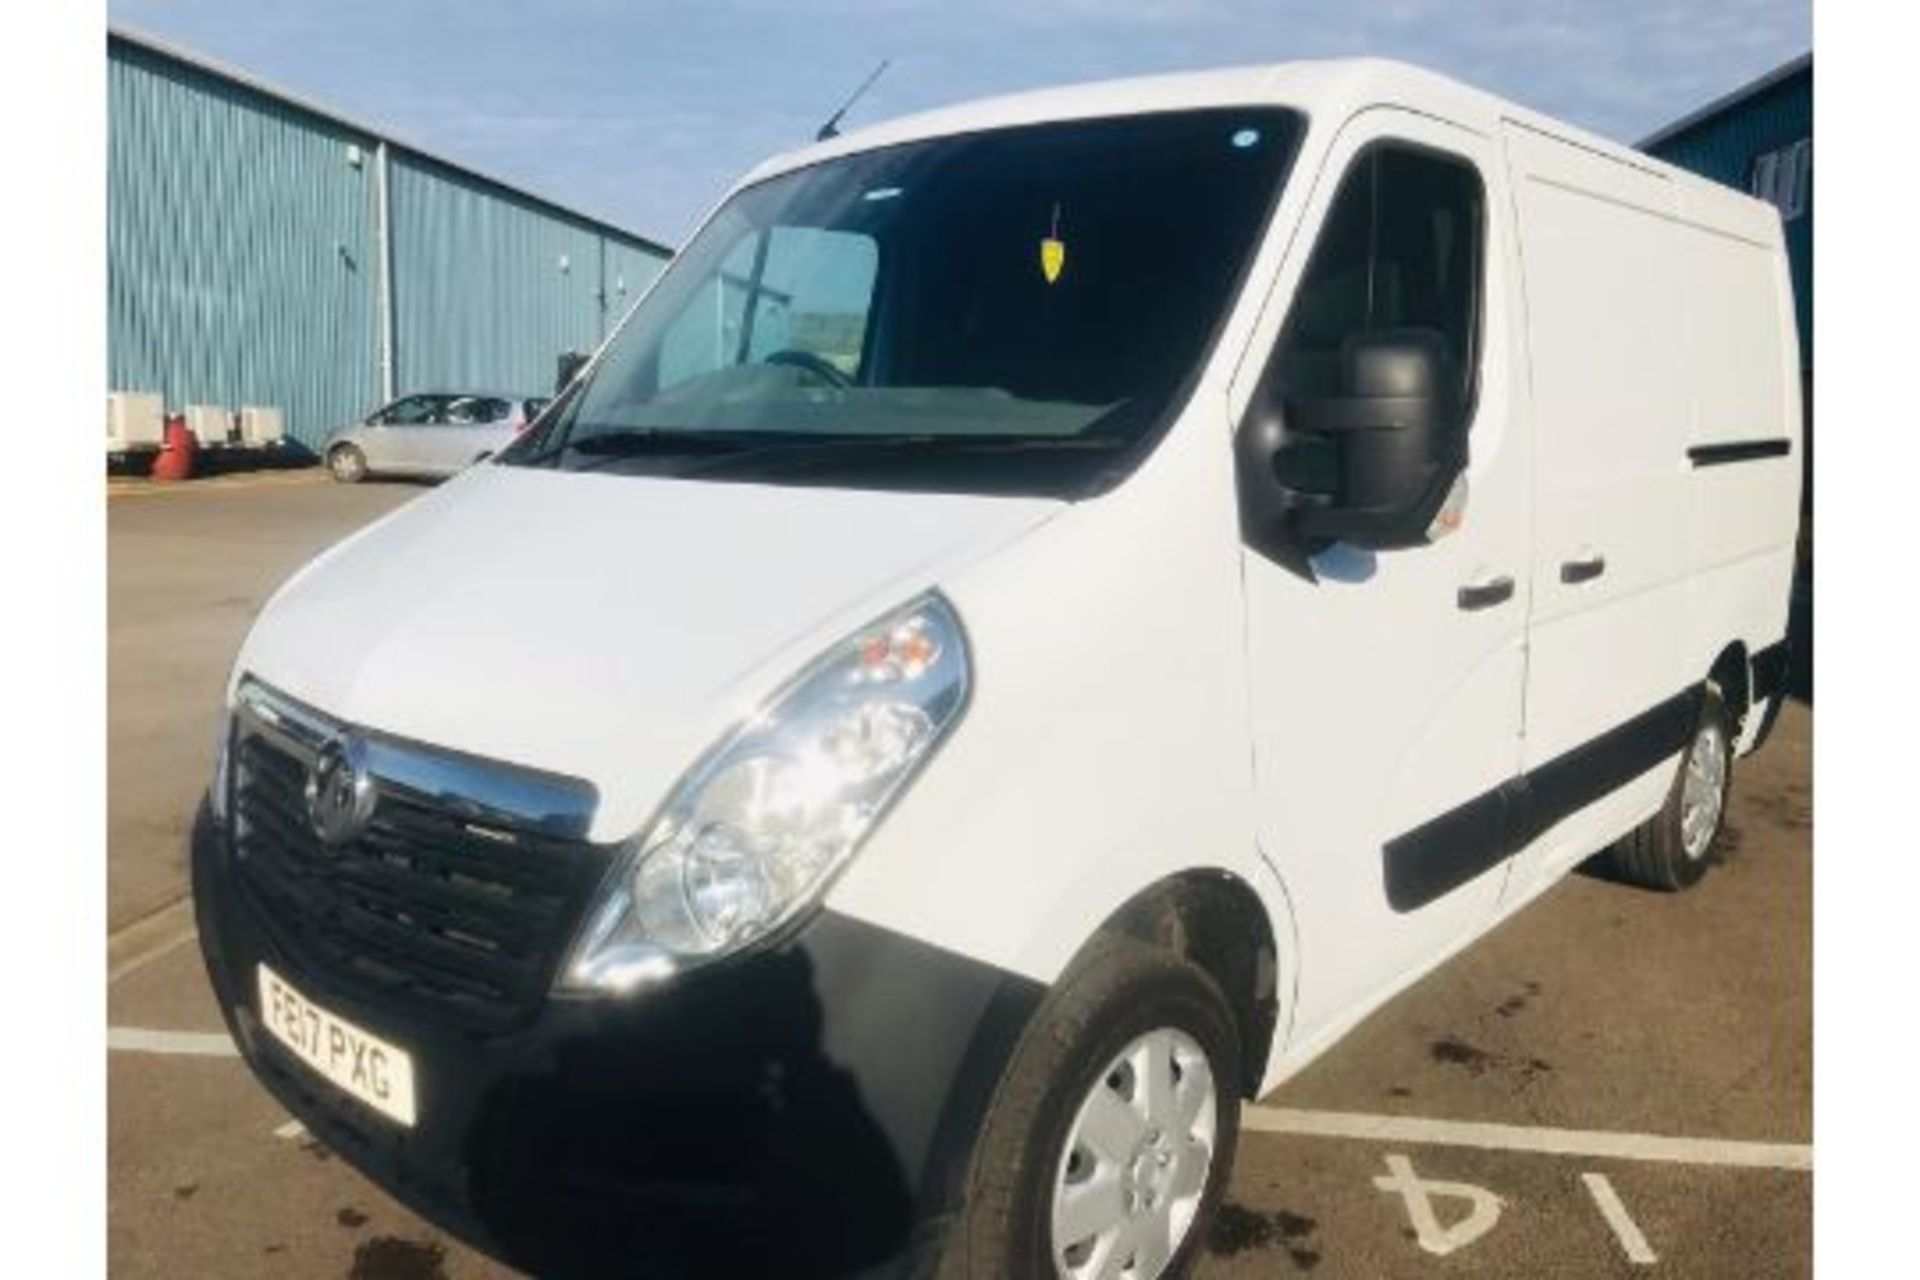 Vauxhall Movano F2800 2.3 CDTI - 2017 17 Reg - Air Con - 1 Keeper From New - Image 6 of 30